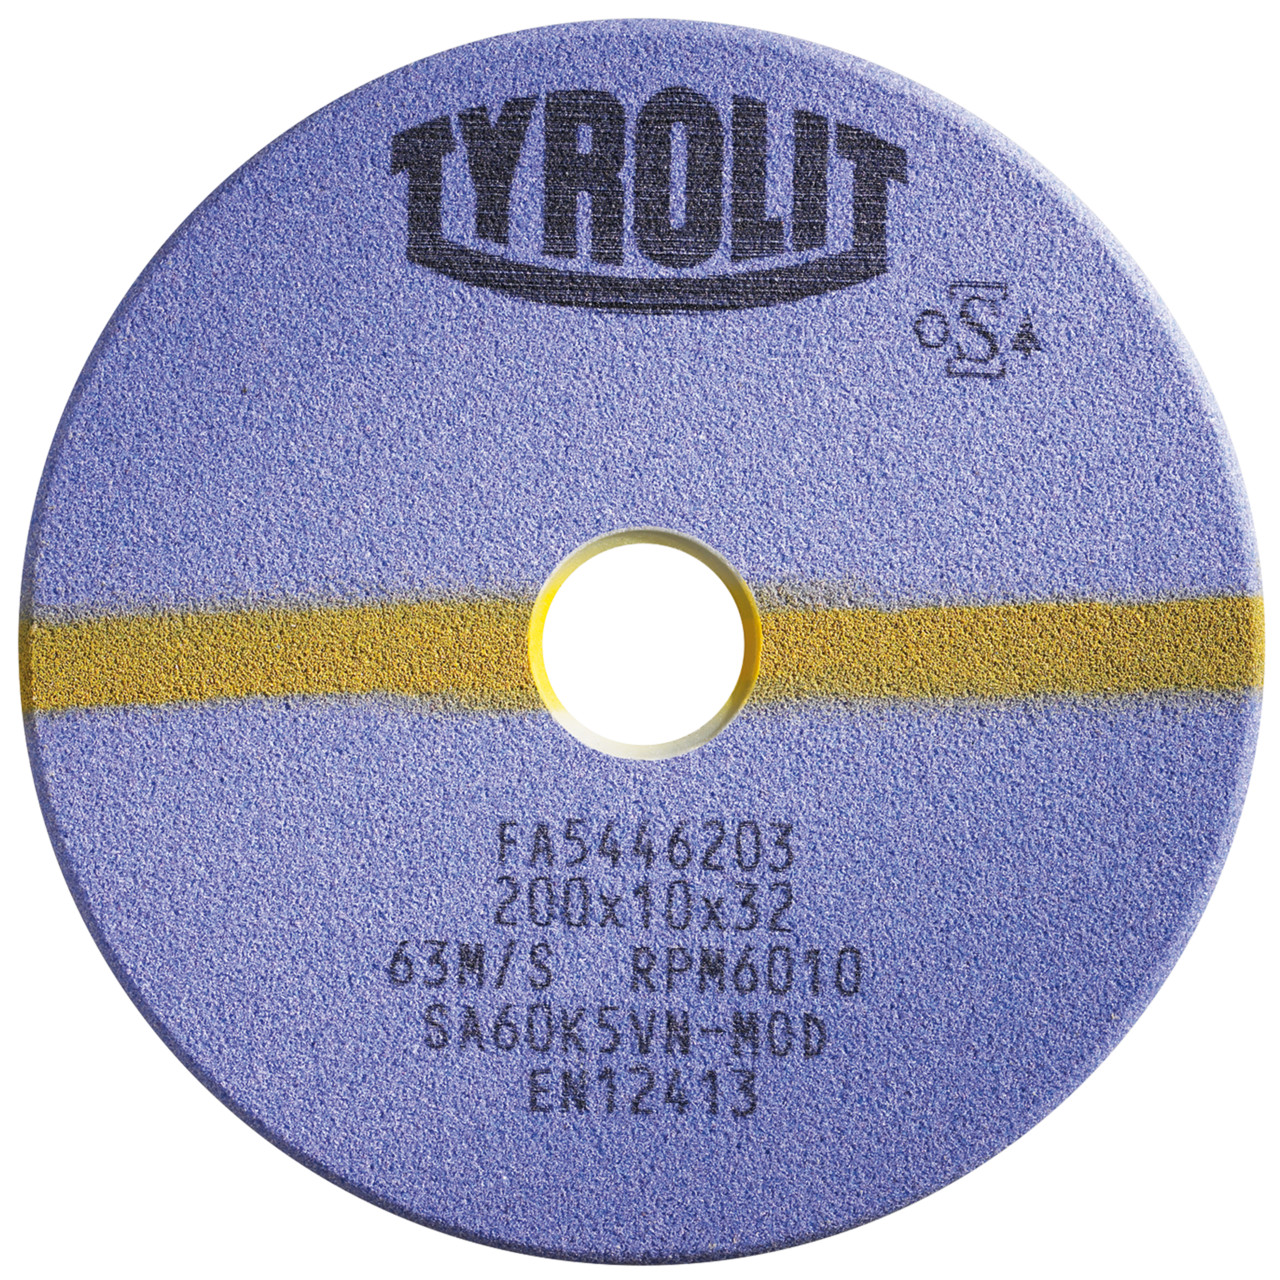 Tyrolit Grinding tools for automatic saw sharpeners DxDxH 150x3x32 For circular saws and stellited band and gang saws, shape: 1C, Art. 226295